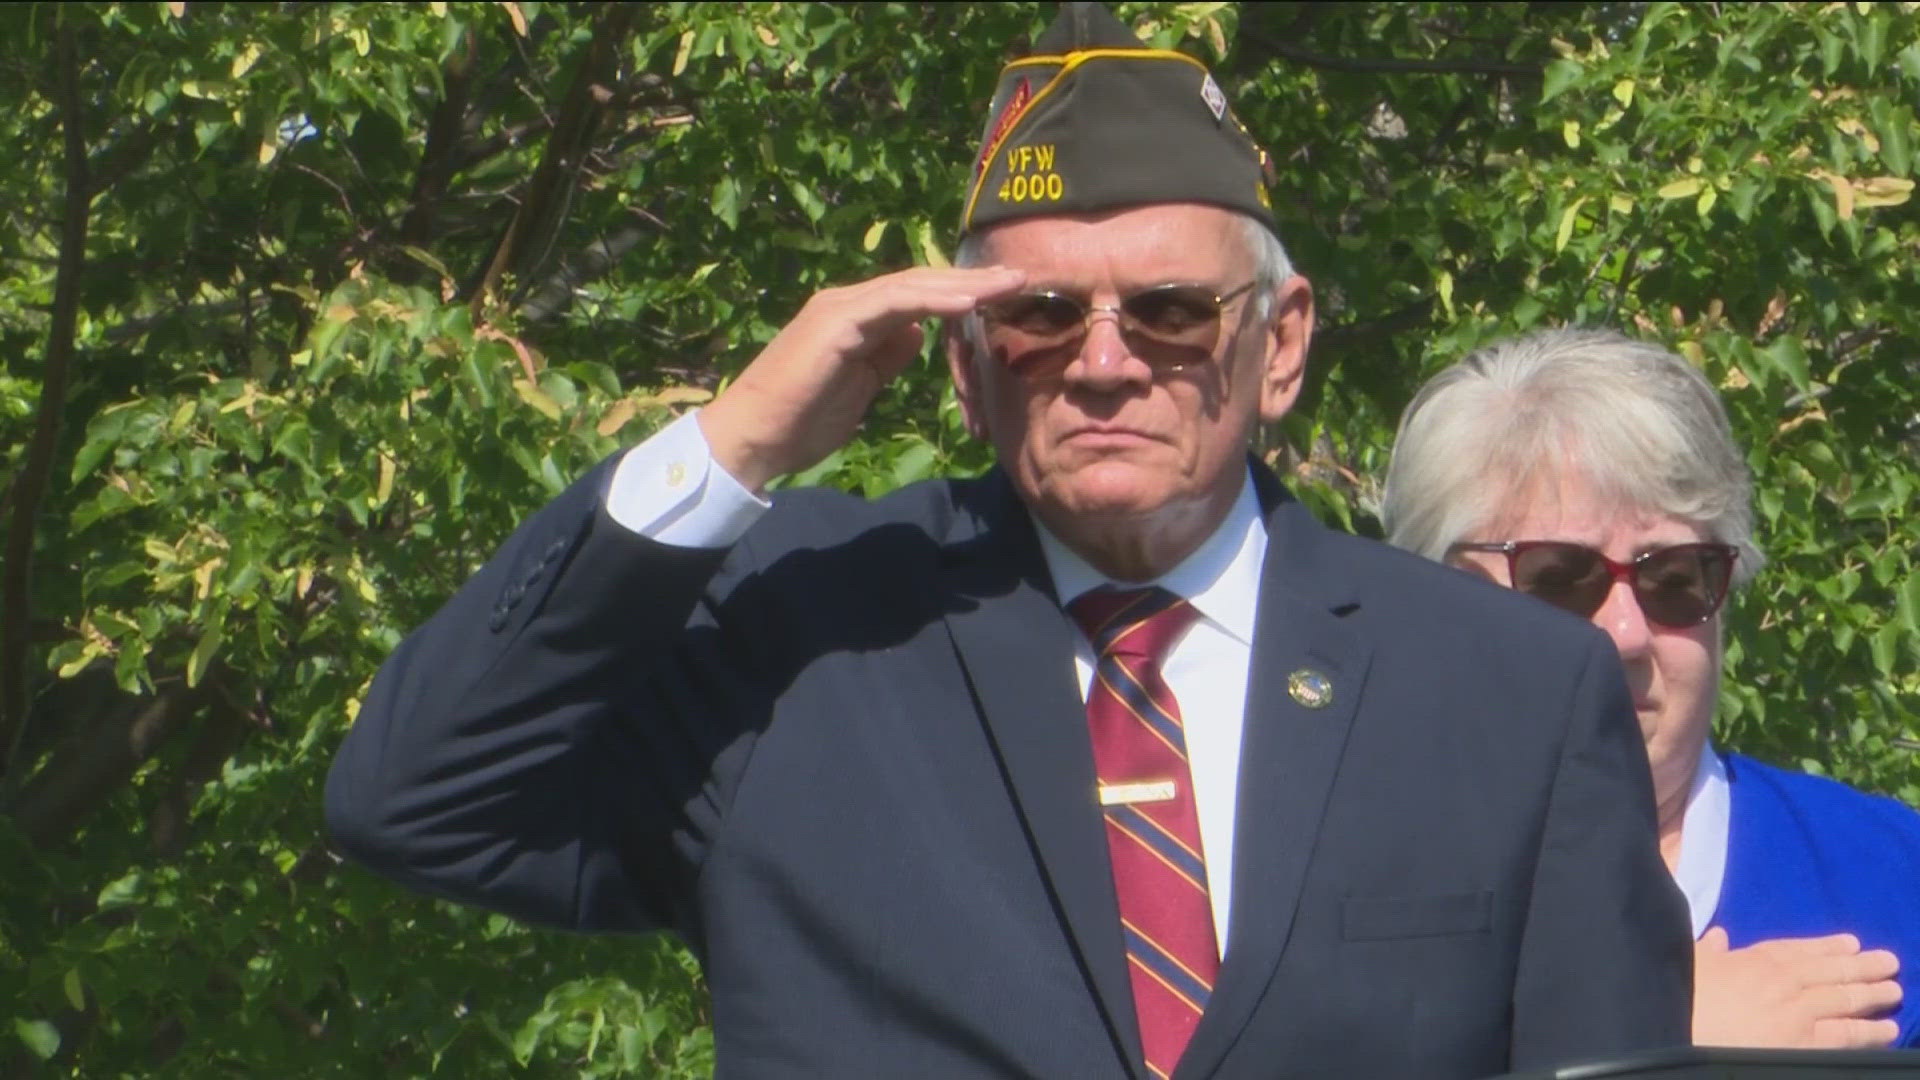 Every year on Memorial Day, hundreds of people attend the annual Memorial Day celebration at the Idaho State Veterans Cemetery, where thousands of vets are buried.